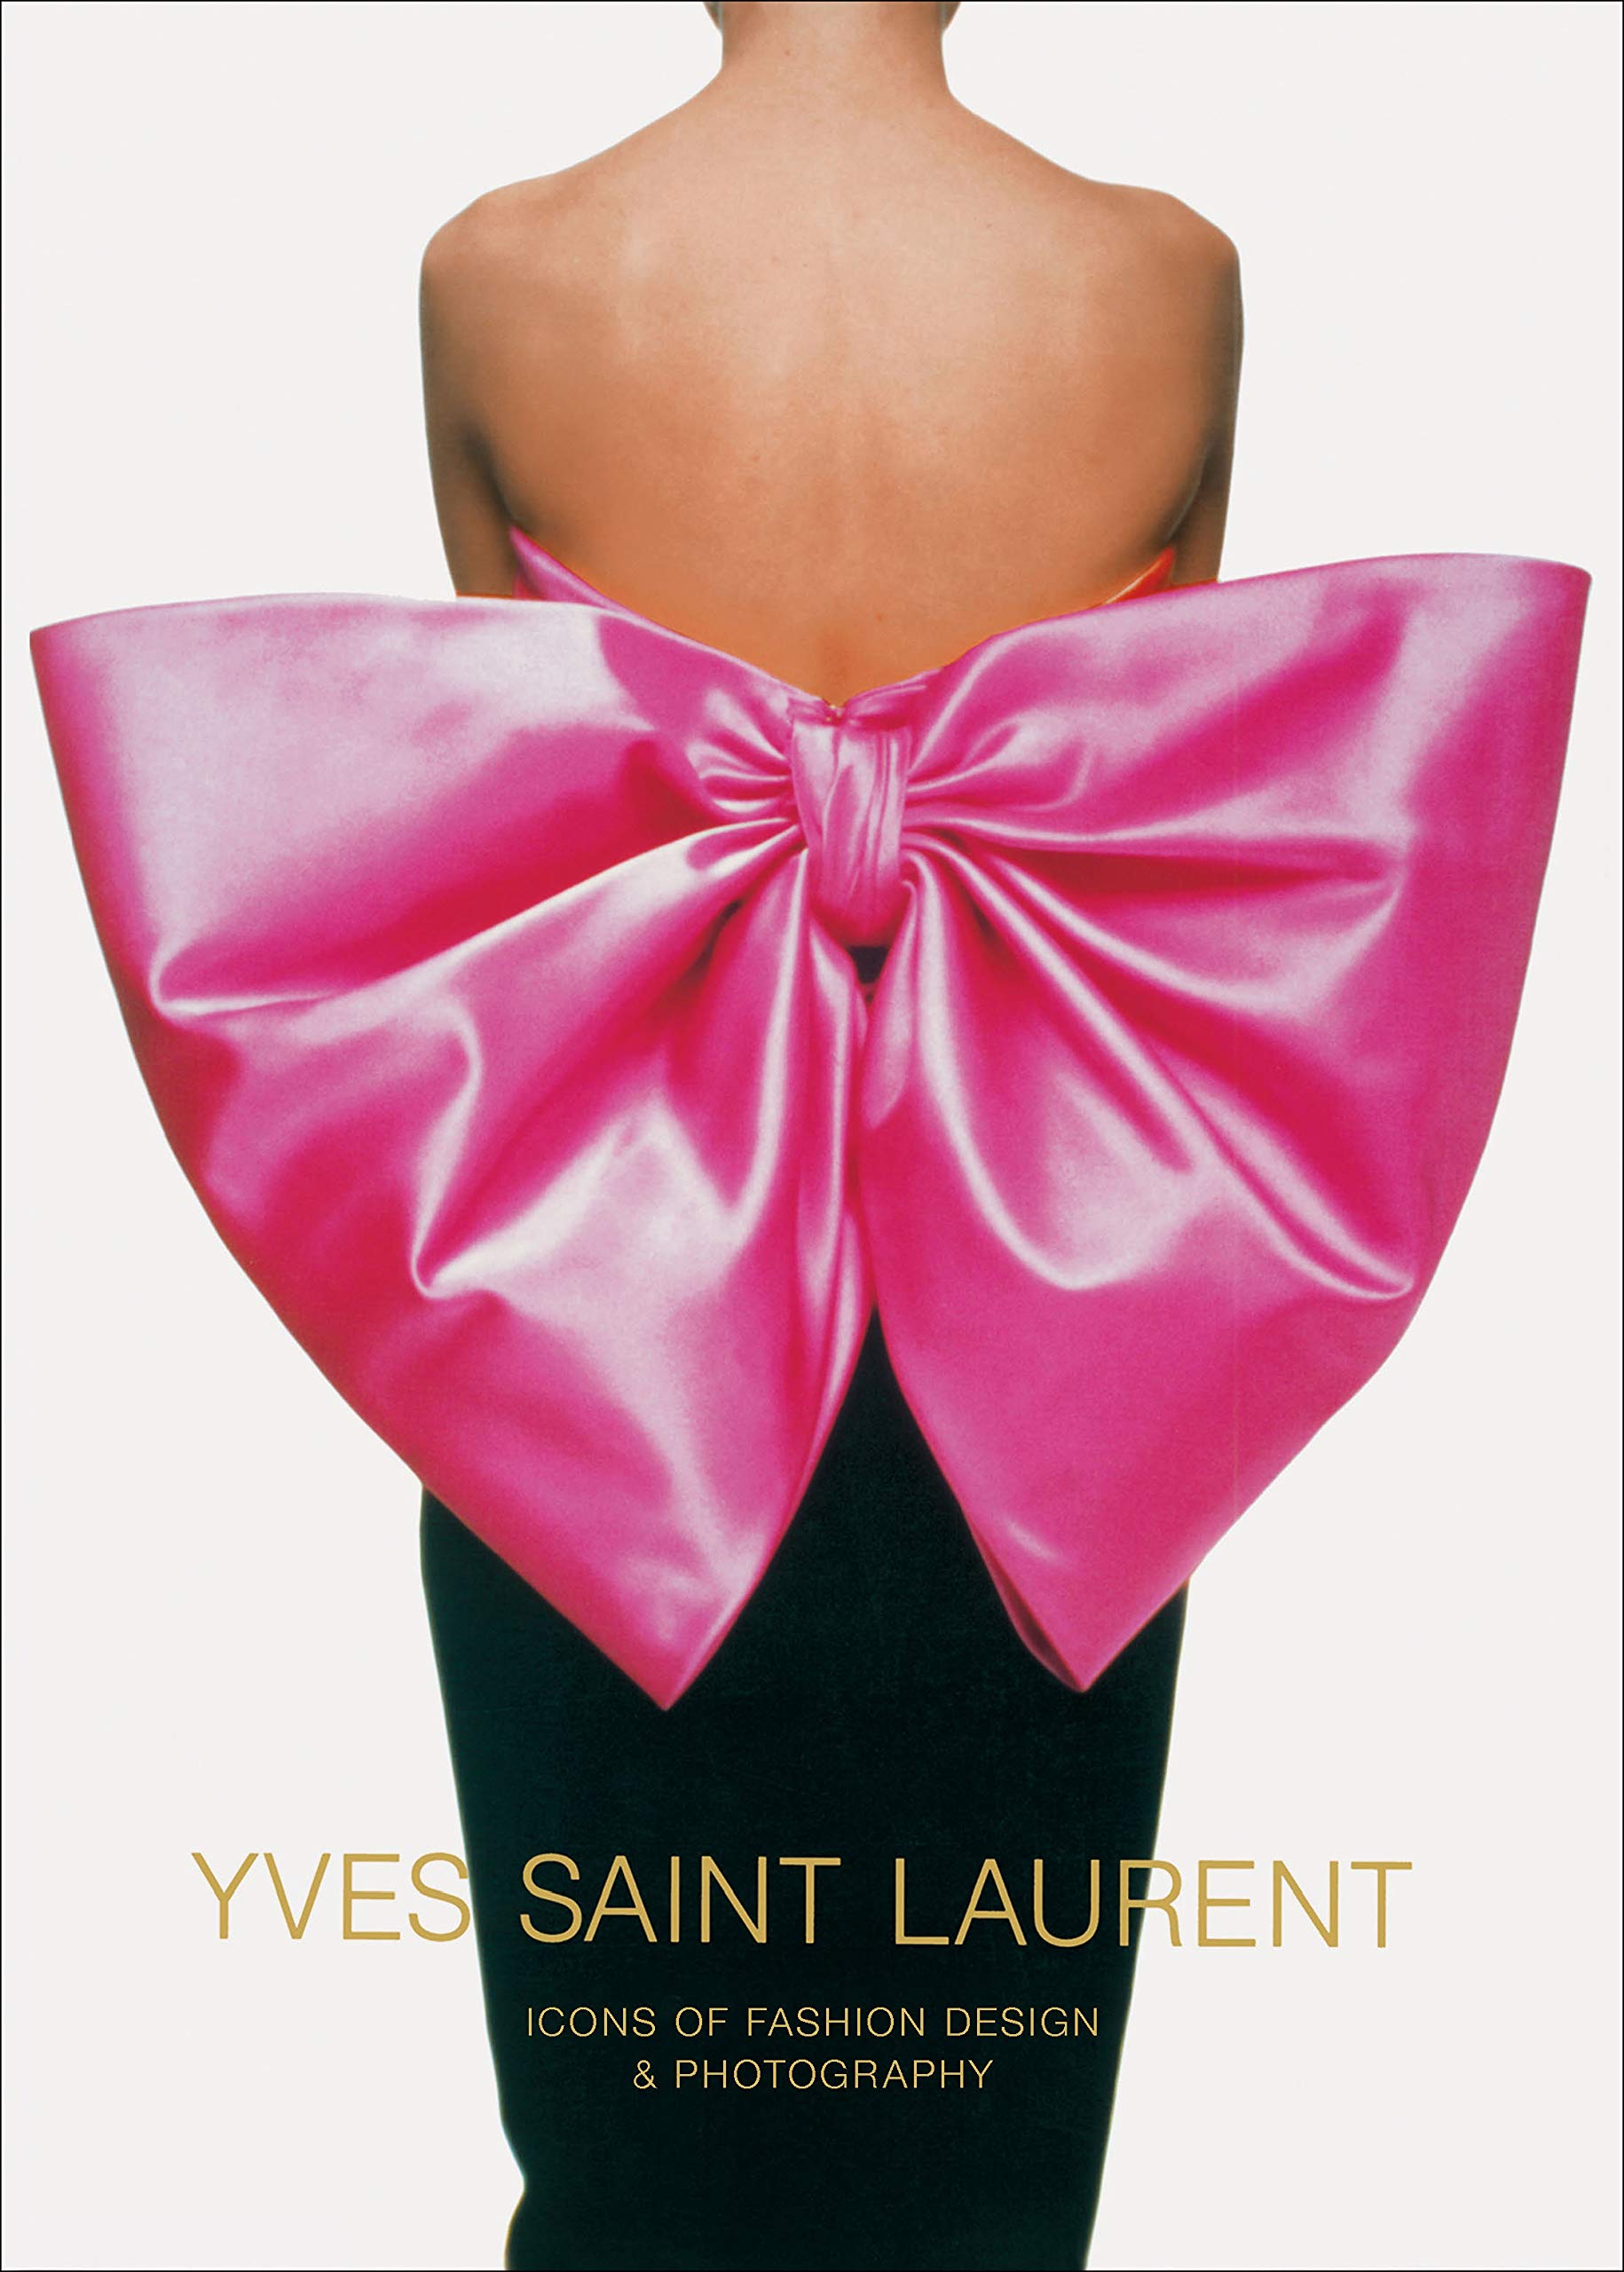 Yves Saint Laurent Icons of Fashion Design & Photography book